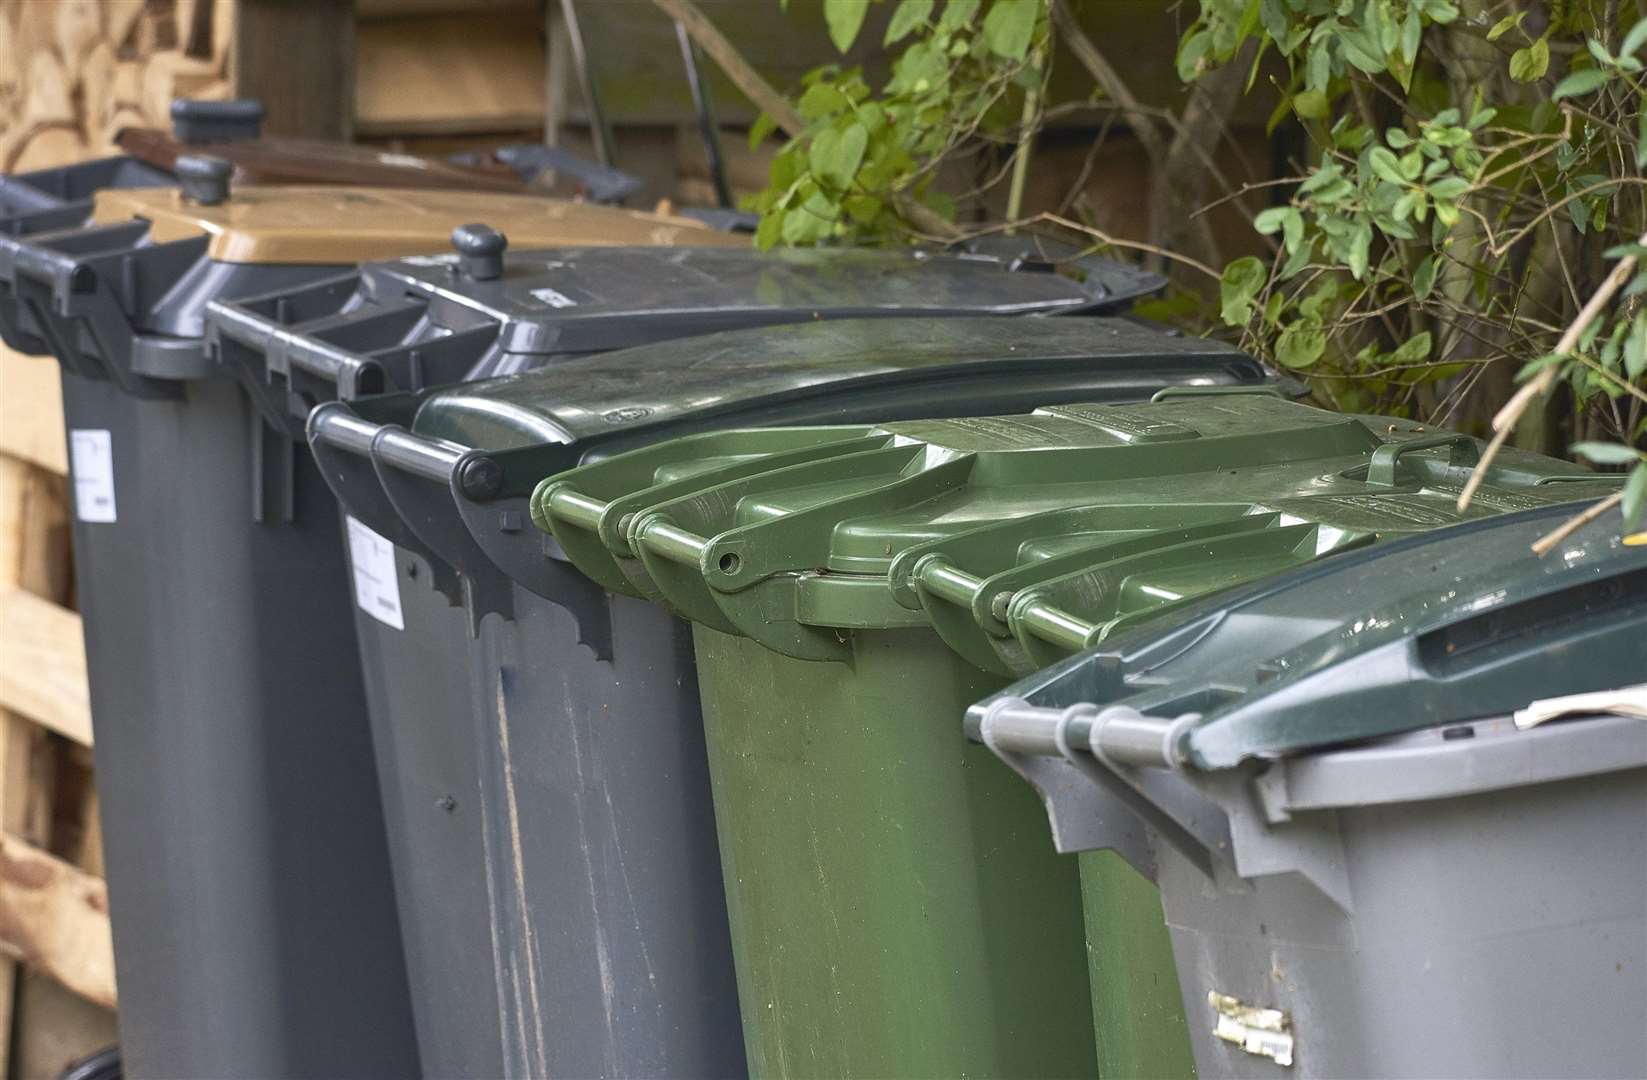 Short-term holiday lets can often get waste collected without paying council tax or for commercial collection